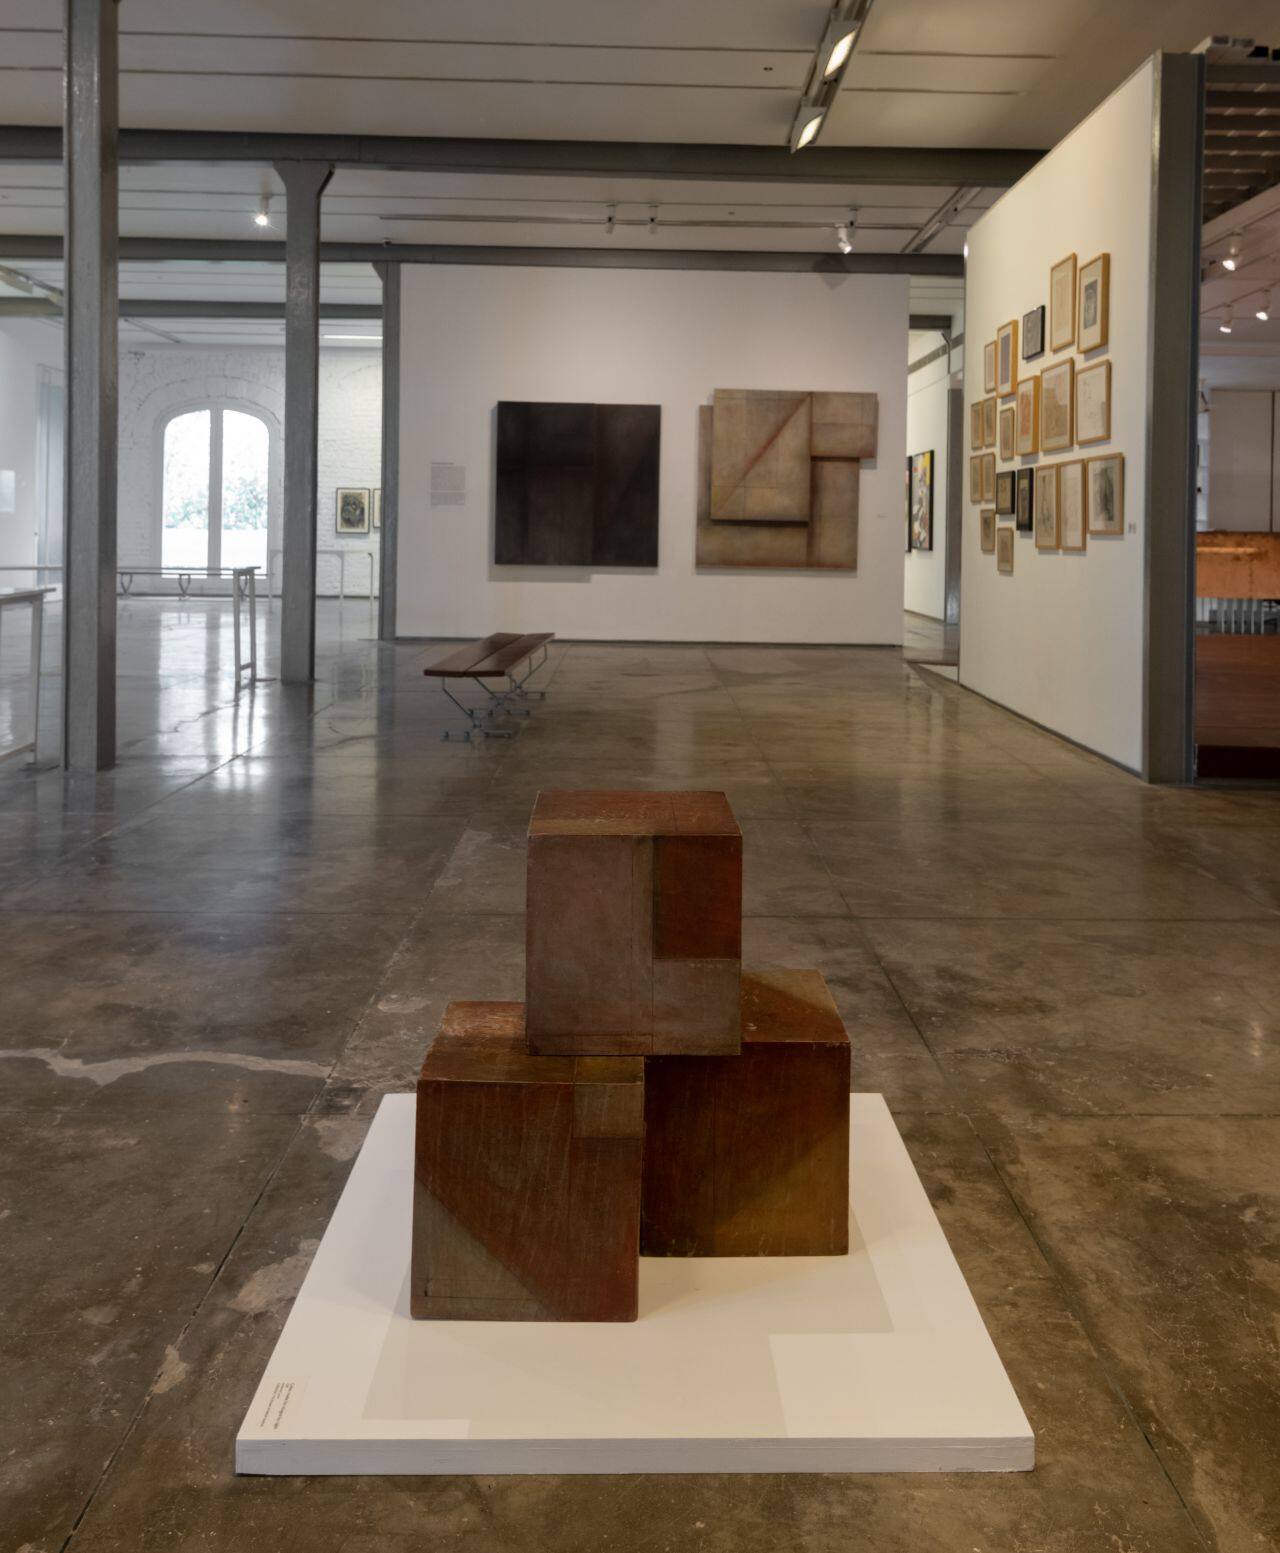 Installation View: The three-cube sculpture in its context in the show.